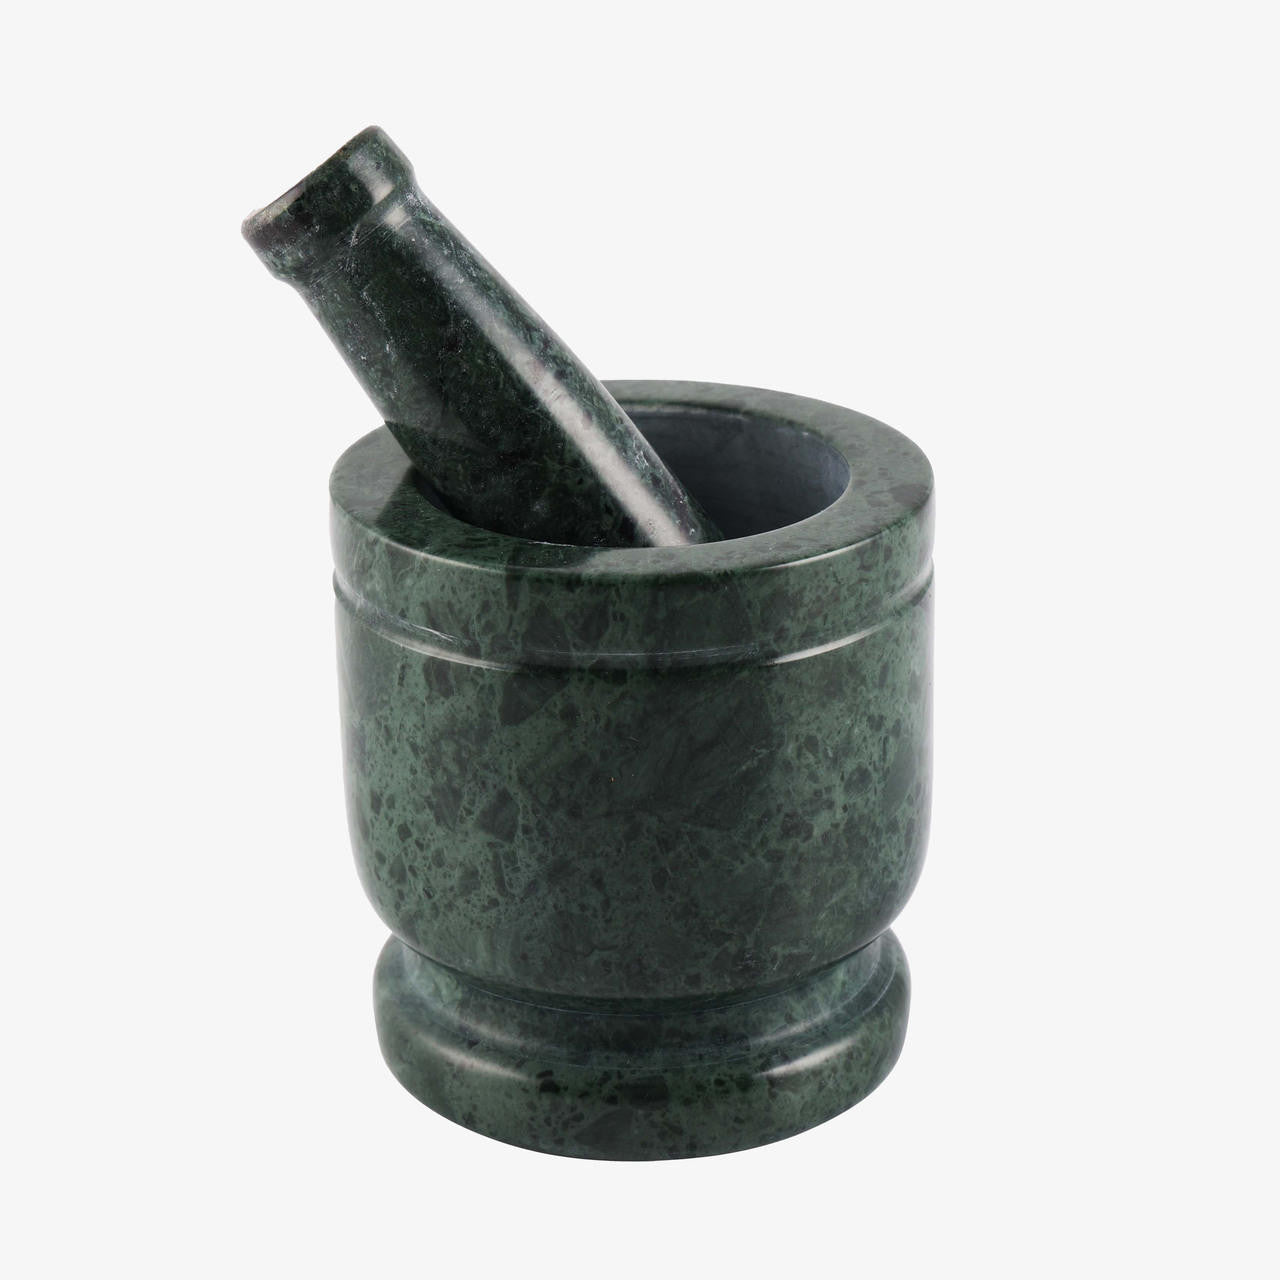 Green Marble Mortar and Pestle Set 5